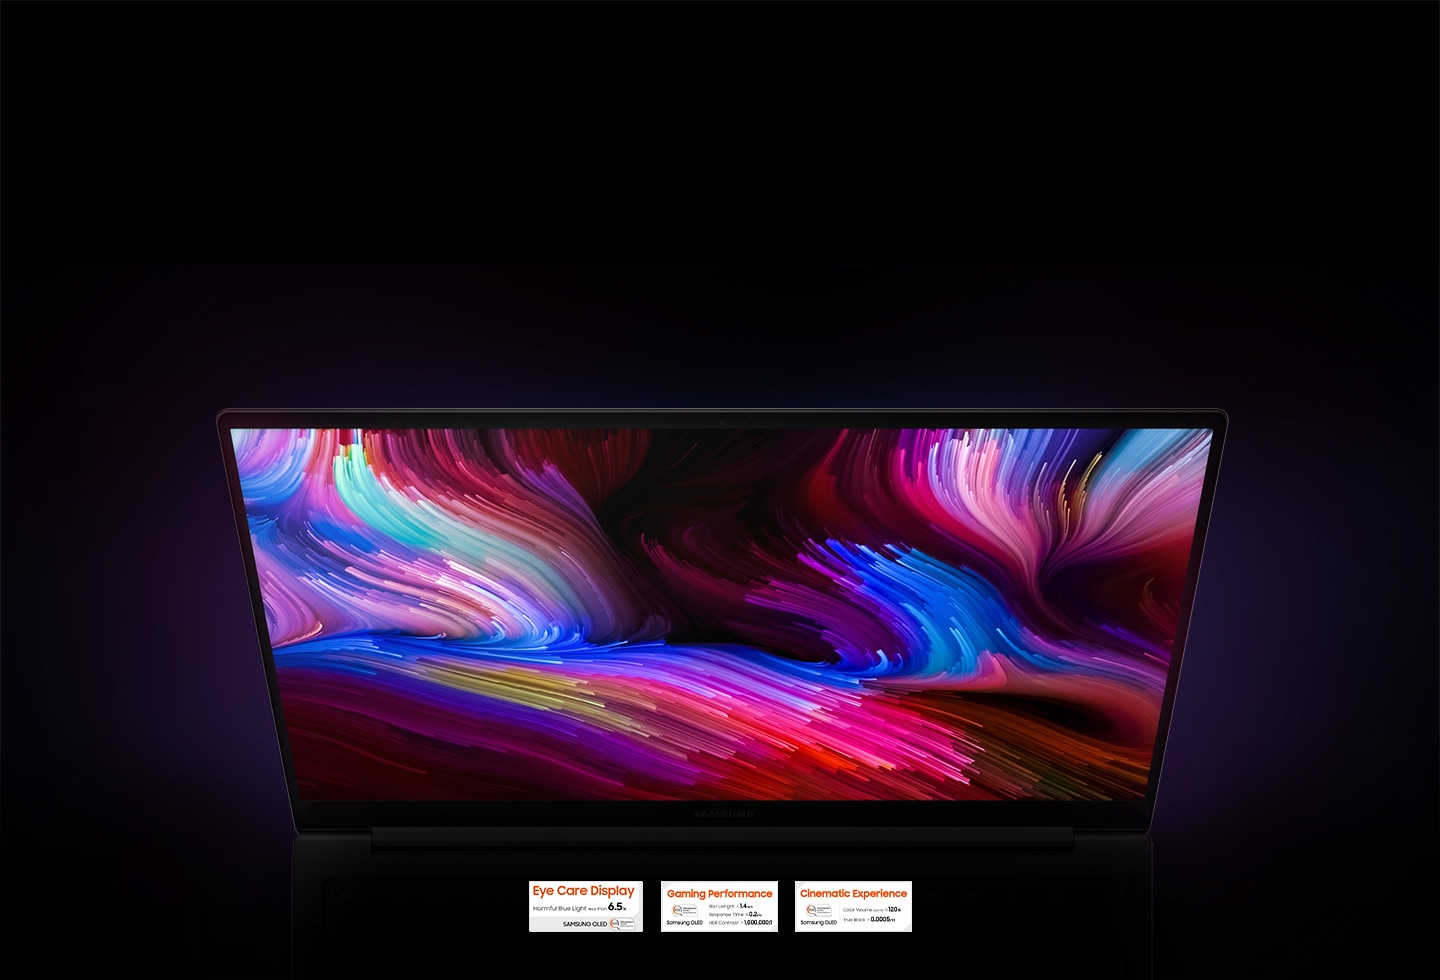 The screen of a Galaxy Book2 Pro is seen from the top with abstract art using many colors and wavy lines as wallpaper. Below the screen are 3 SGS certifications. The Eye Care Display certification has the text Harmful Blue Light less than 6.5%. The Gaming Performance certification has the text Blur Length, Response Times, and HDR Contrast less than 1.4mm, 0.2ms, and more than 1,000,000:1 each. The Cinematic Experience certification has the text Color Volume more than 120% and True Black less than 0.0005nit.